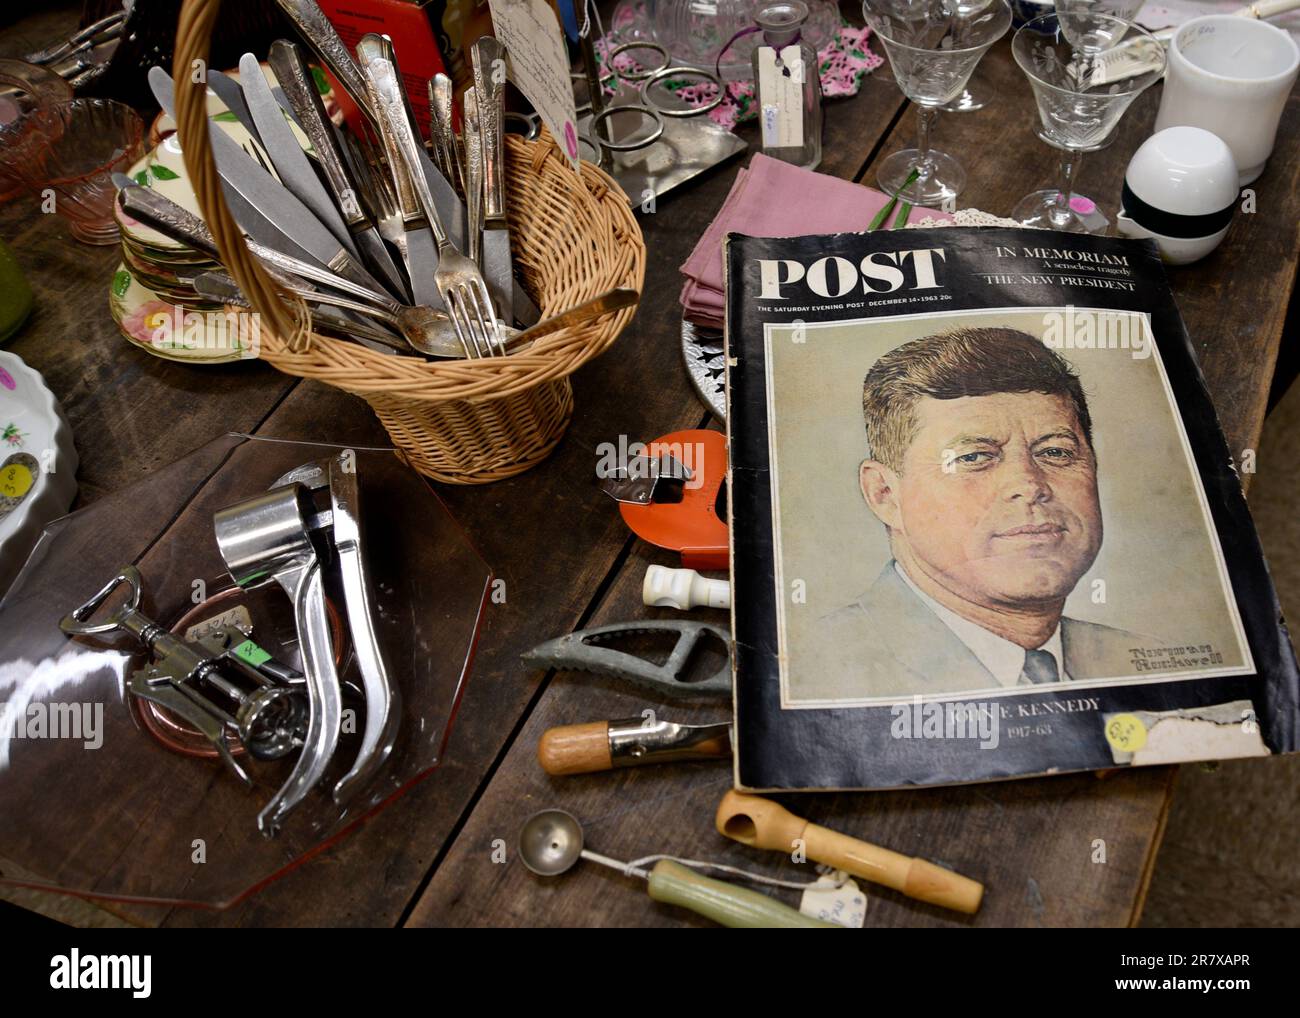 A copy of the Dec. 14, 1963 edition of The Saturday Evening Post with President John F. Kennedy on the cover for sale in an American antique shop. Stock Photo